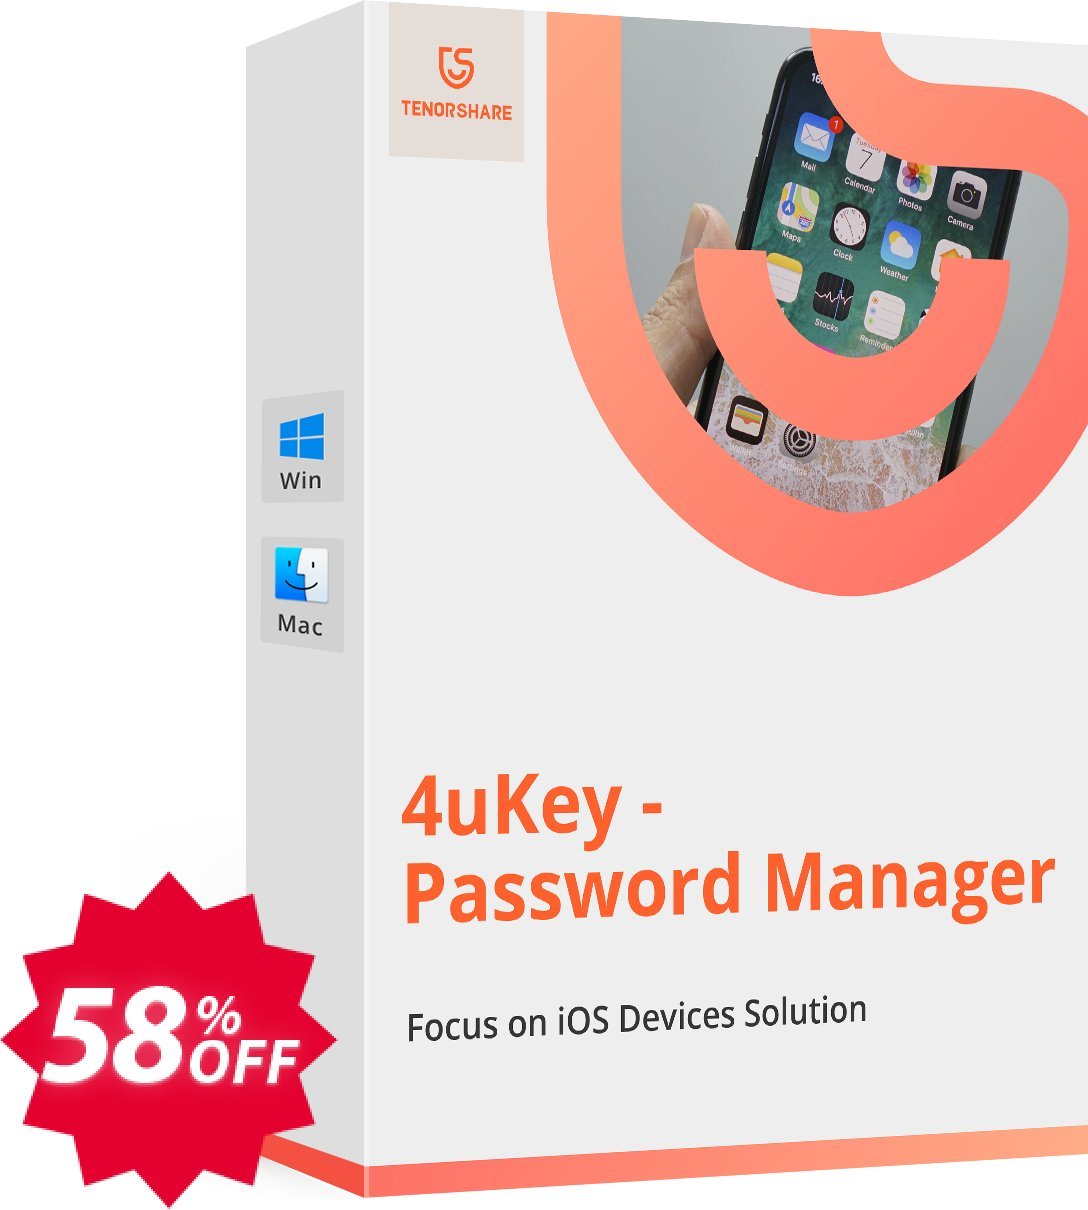 Tenorshare 4uKey Password Manager, Lifetime Plan  Coupon code 58% discount 